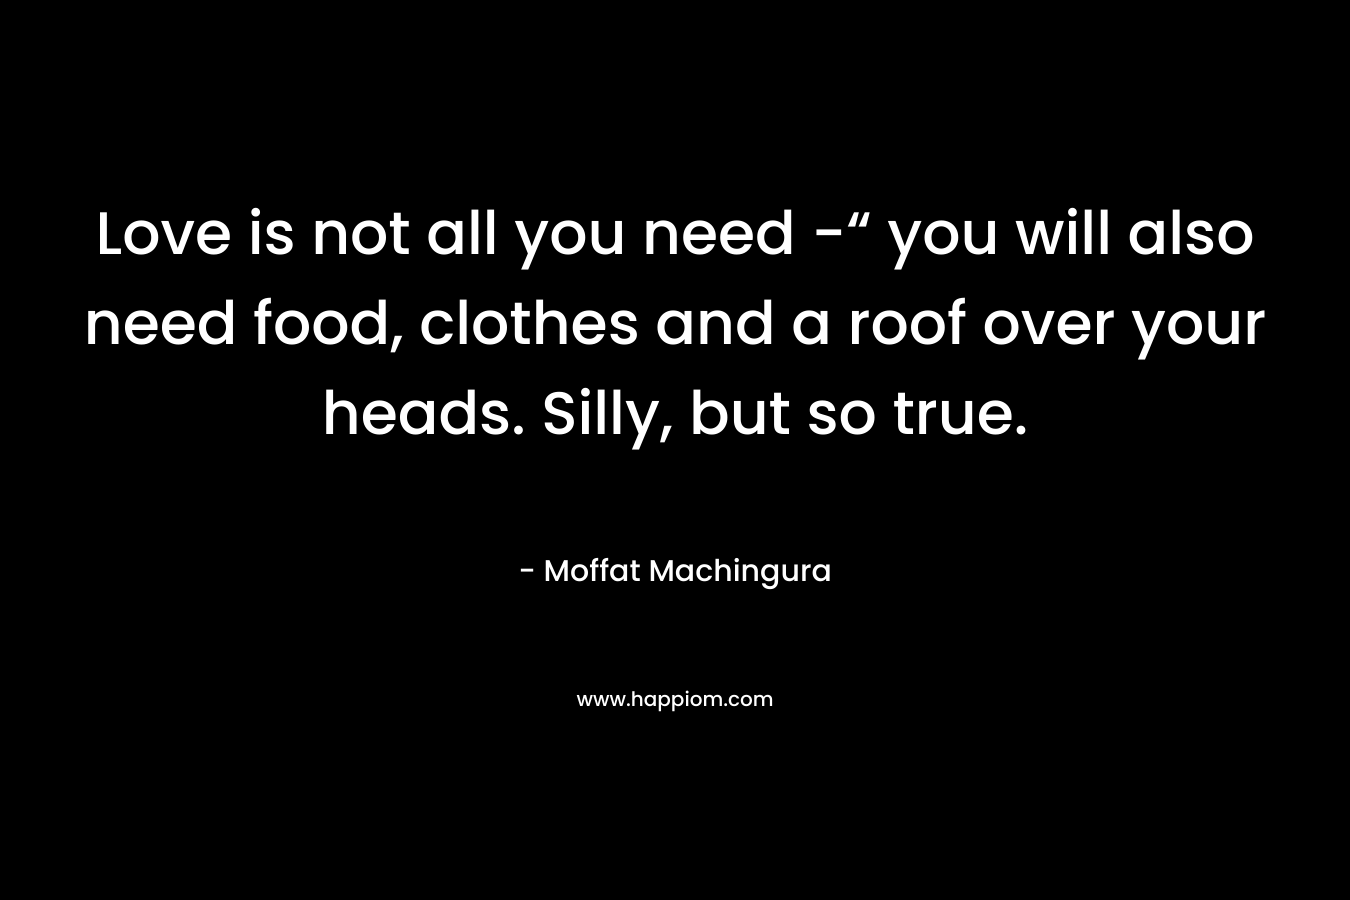 Love is not all you need -“ you will also need food, clothes and a roof over your heads. Silly, but so true. – Moffat Machingura